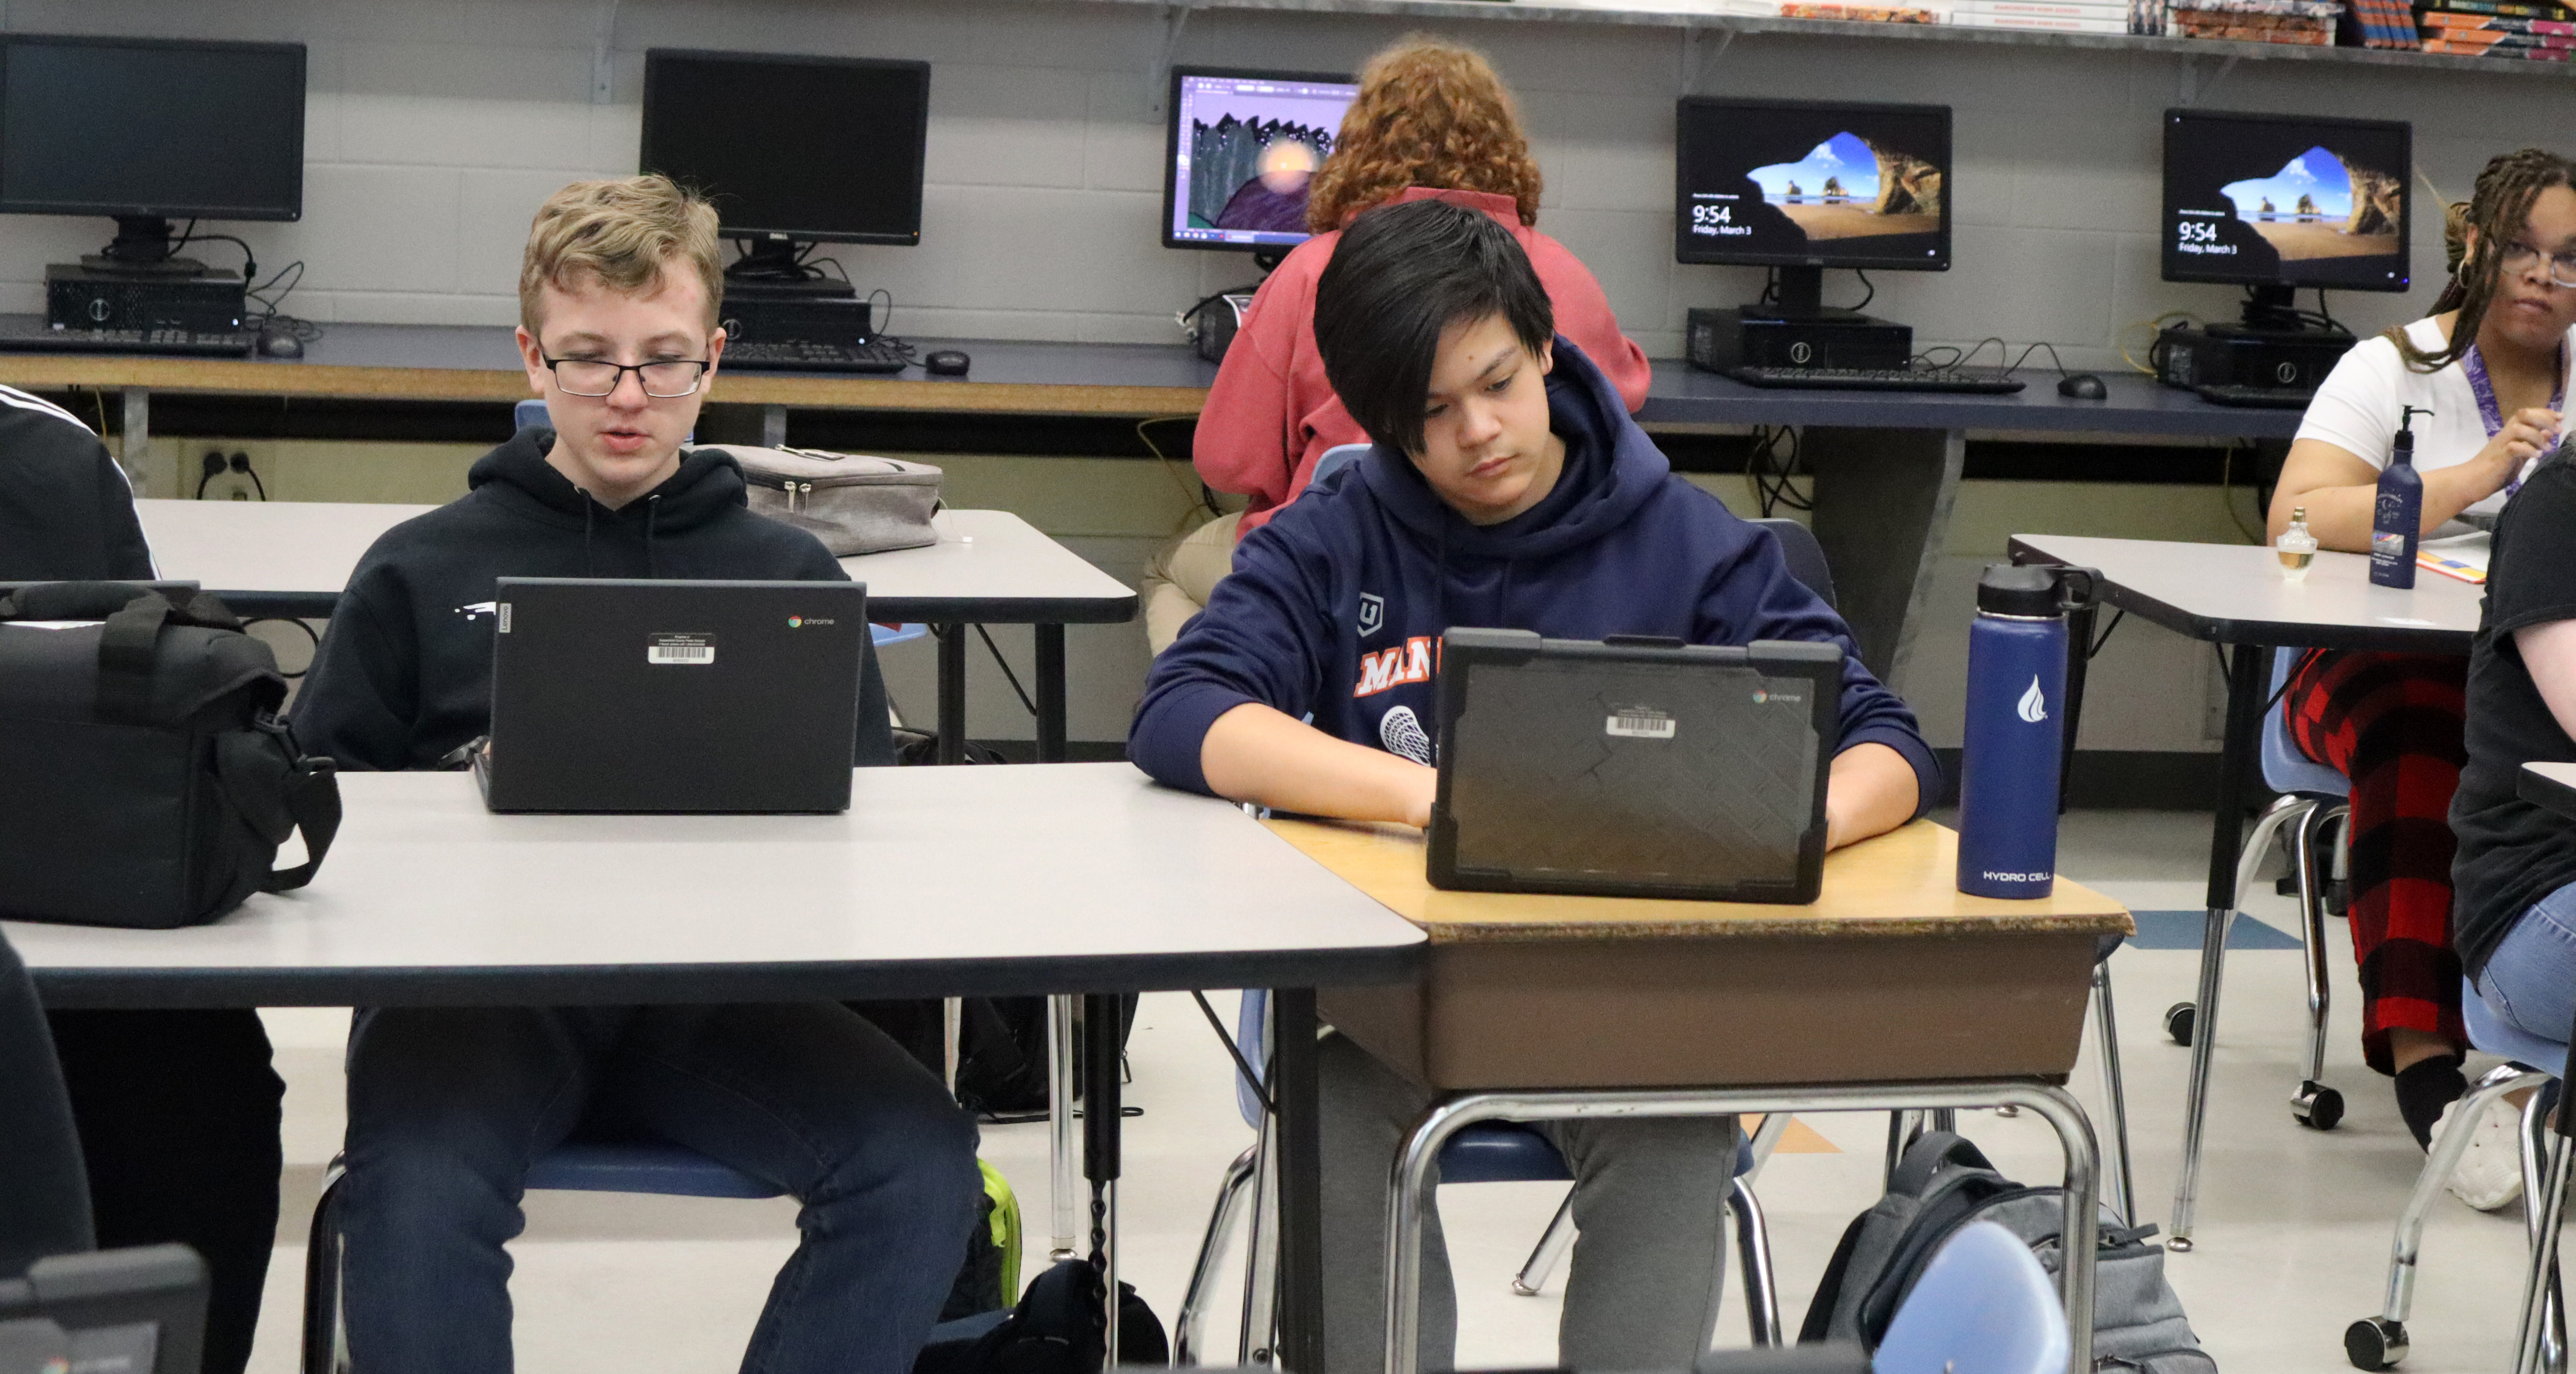 Students working on their laptops in class